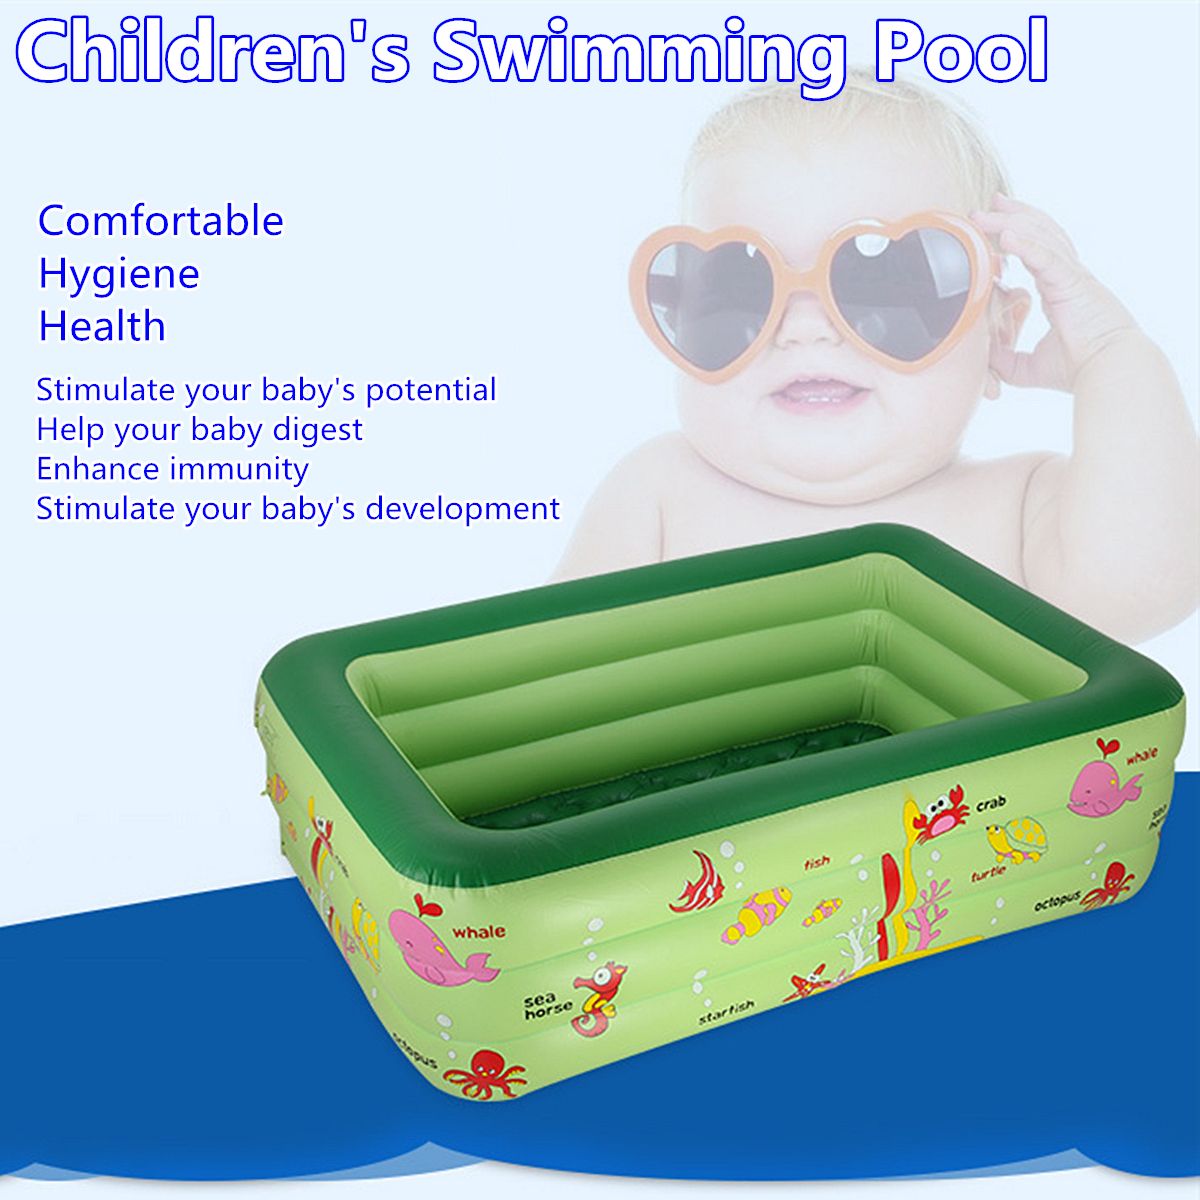 21014565CM-Kids-Family-Inflatable-Swimming-Pool-Backyard-Outdoor-Water-Playing-Pool-1730282